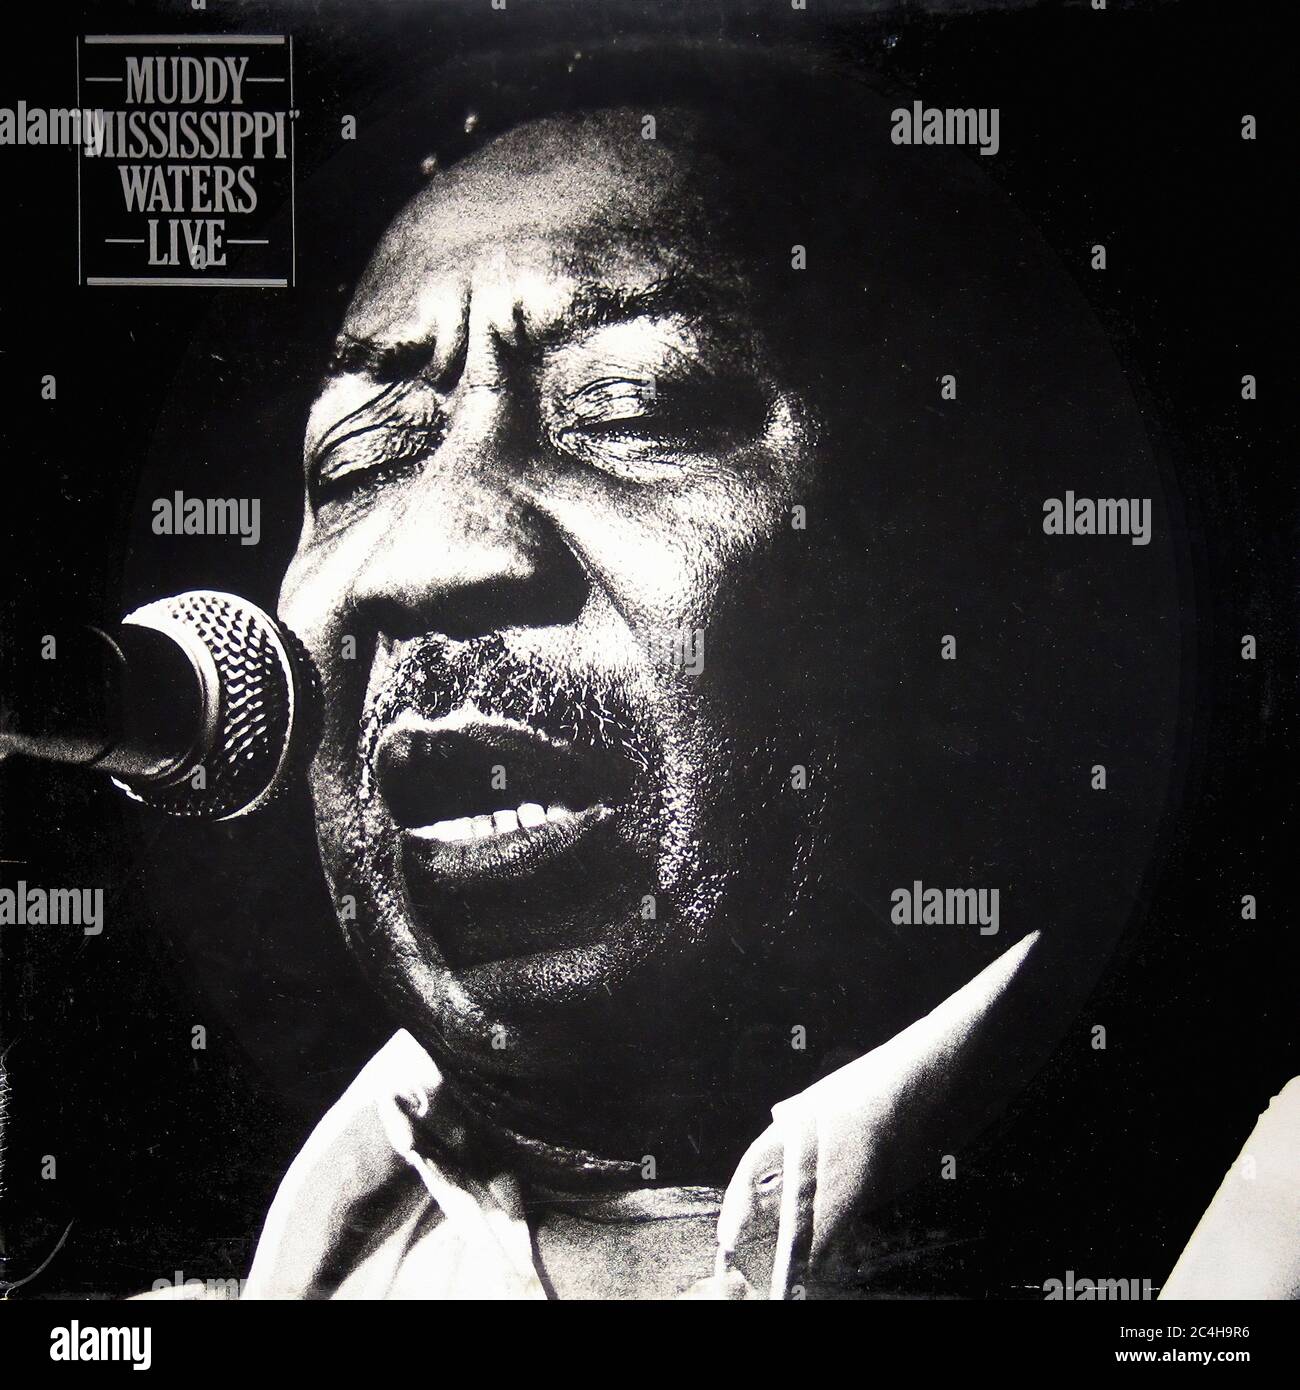 Muddy Waters Muddy 'ississippi' Waters Live 12'' Vinyl LP - Vintage Record Cover Banque D'Images